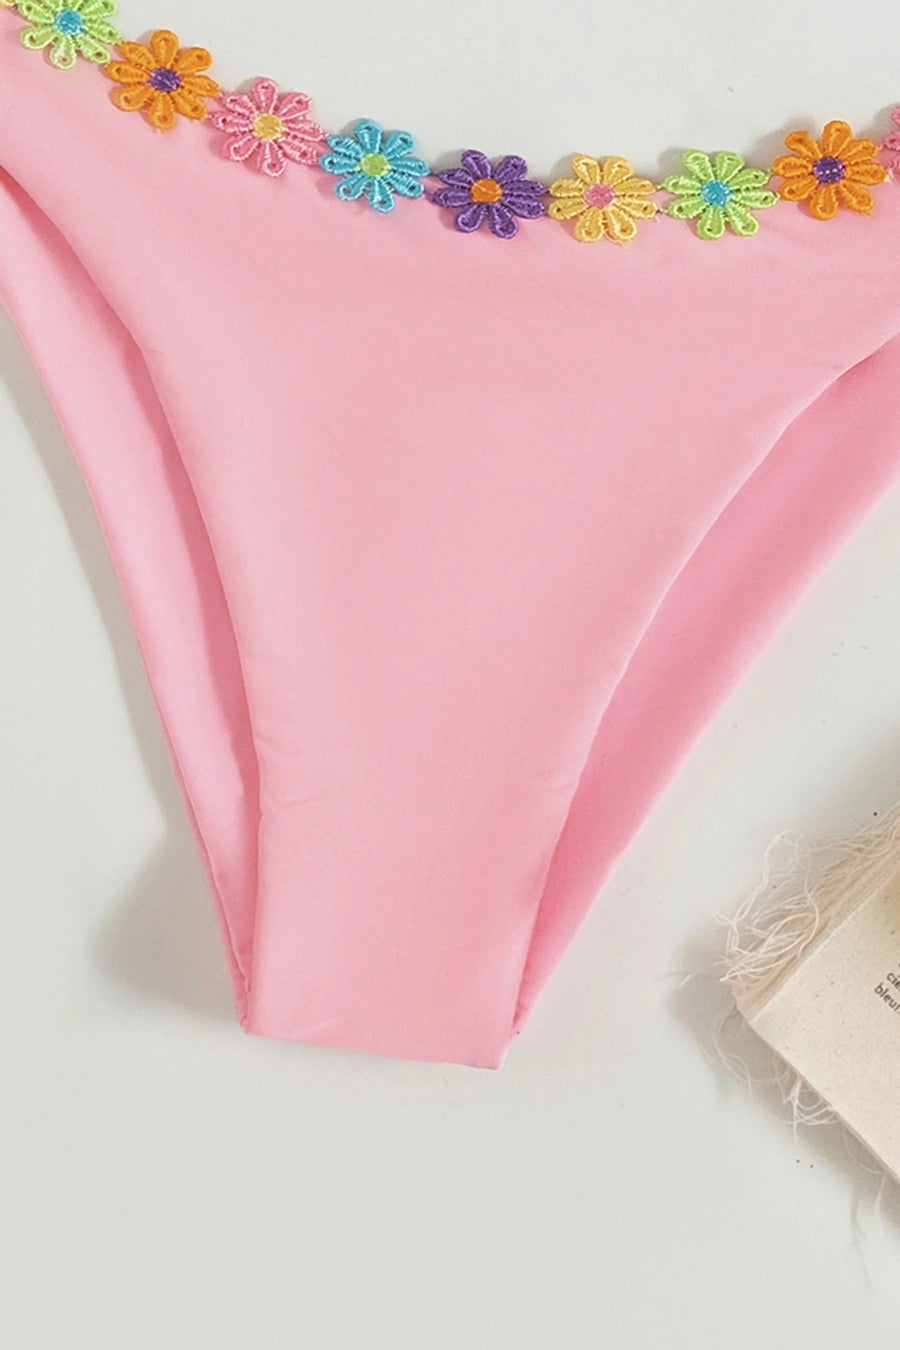 Pink Halter Style Bikini Adorned With Flowers